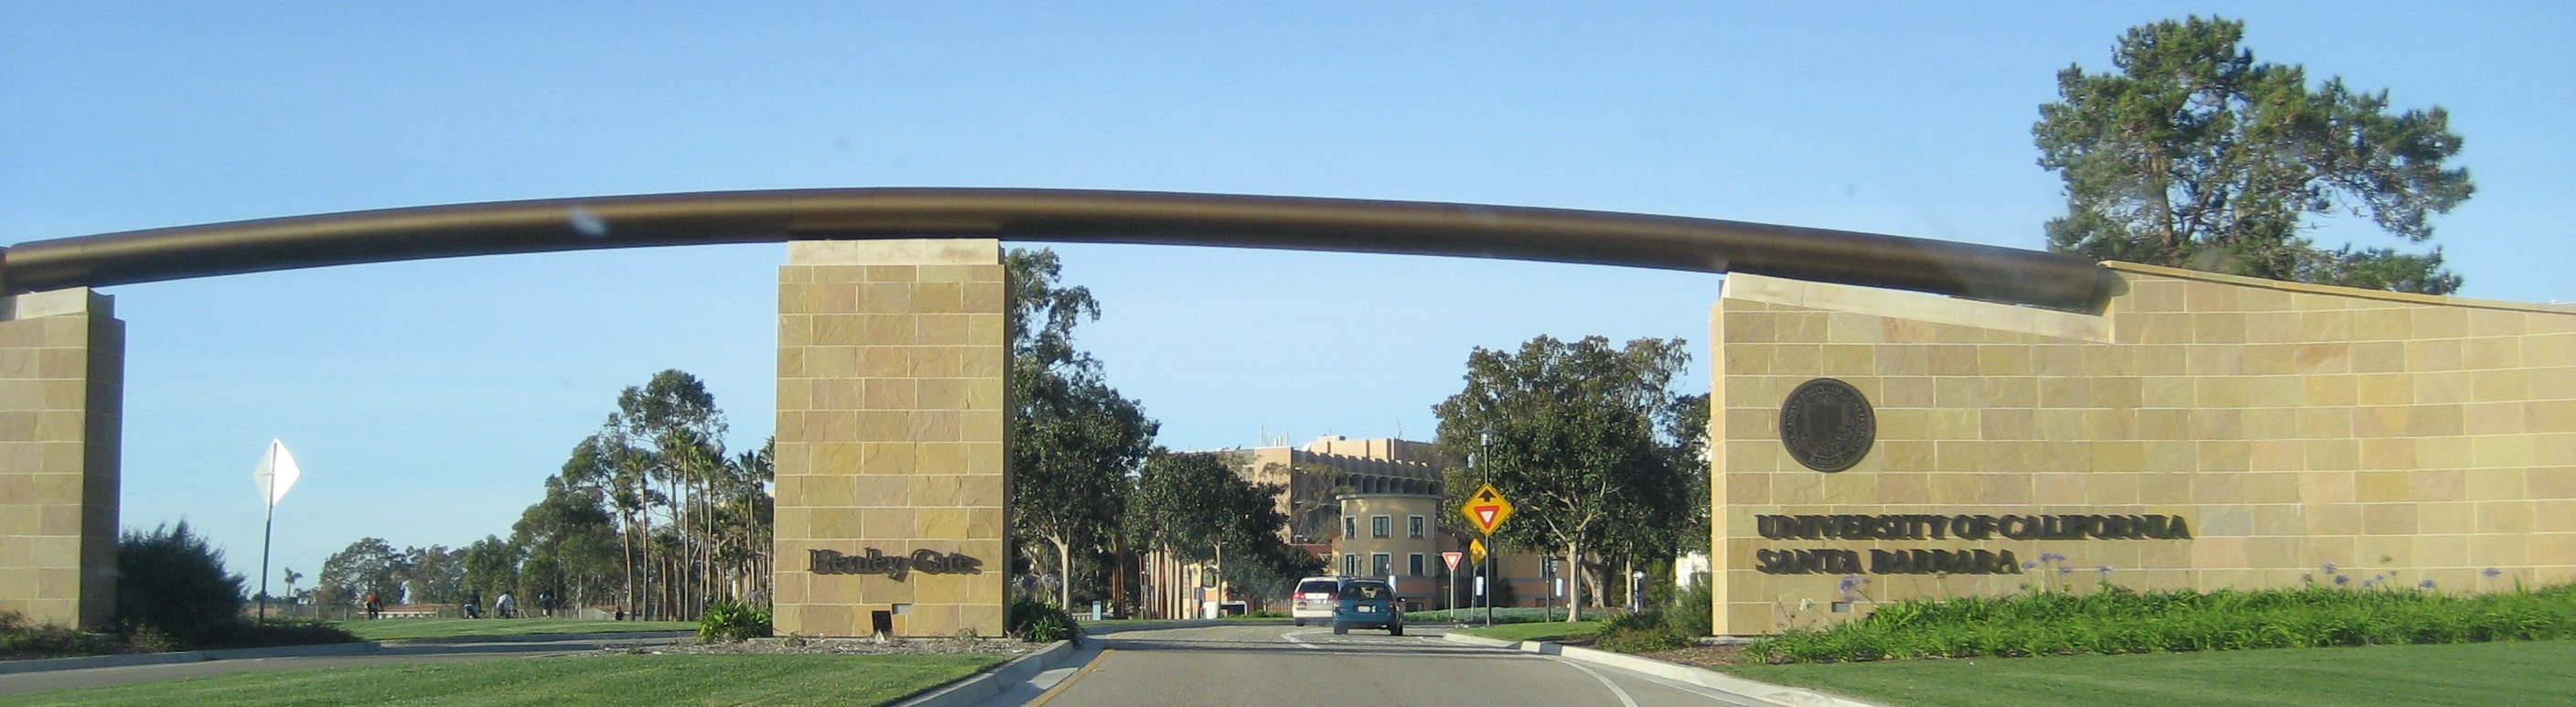 [Henley Gate at UCSB]